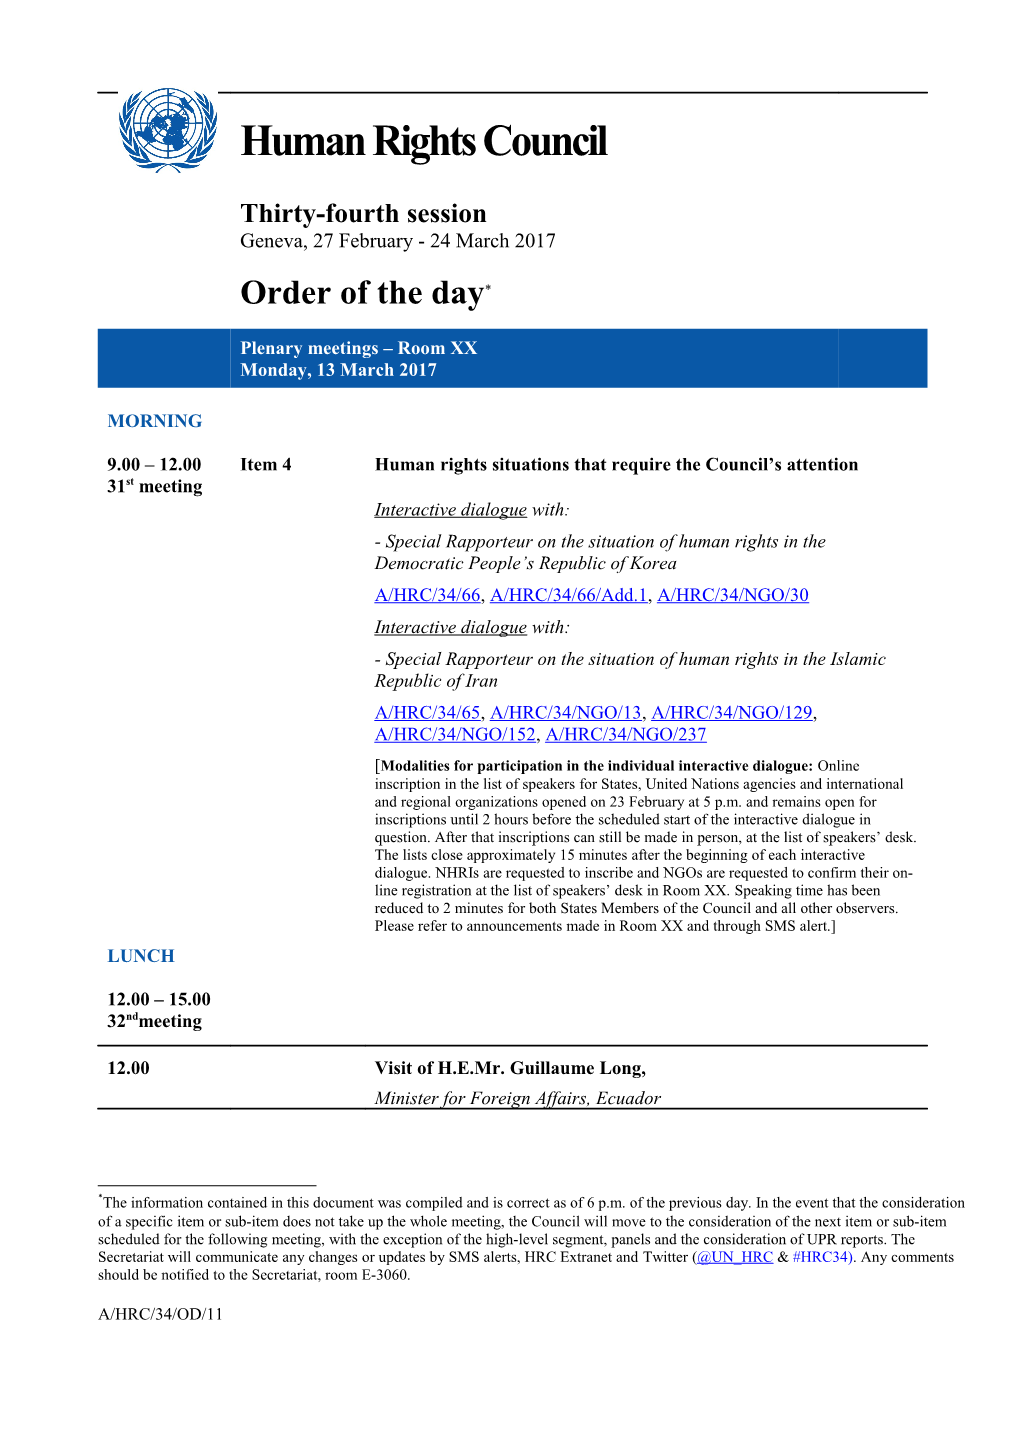 Order of the Day, Monday 13 March 2017